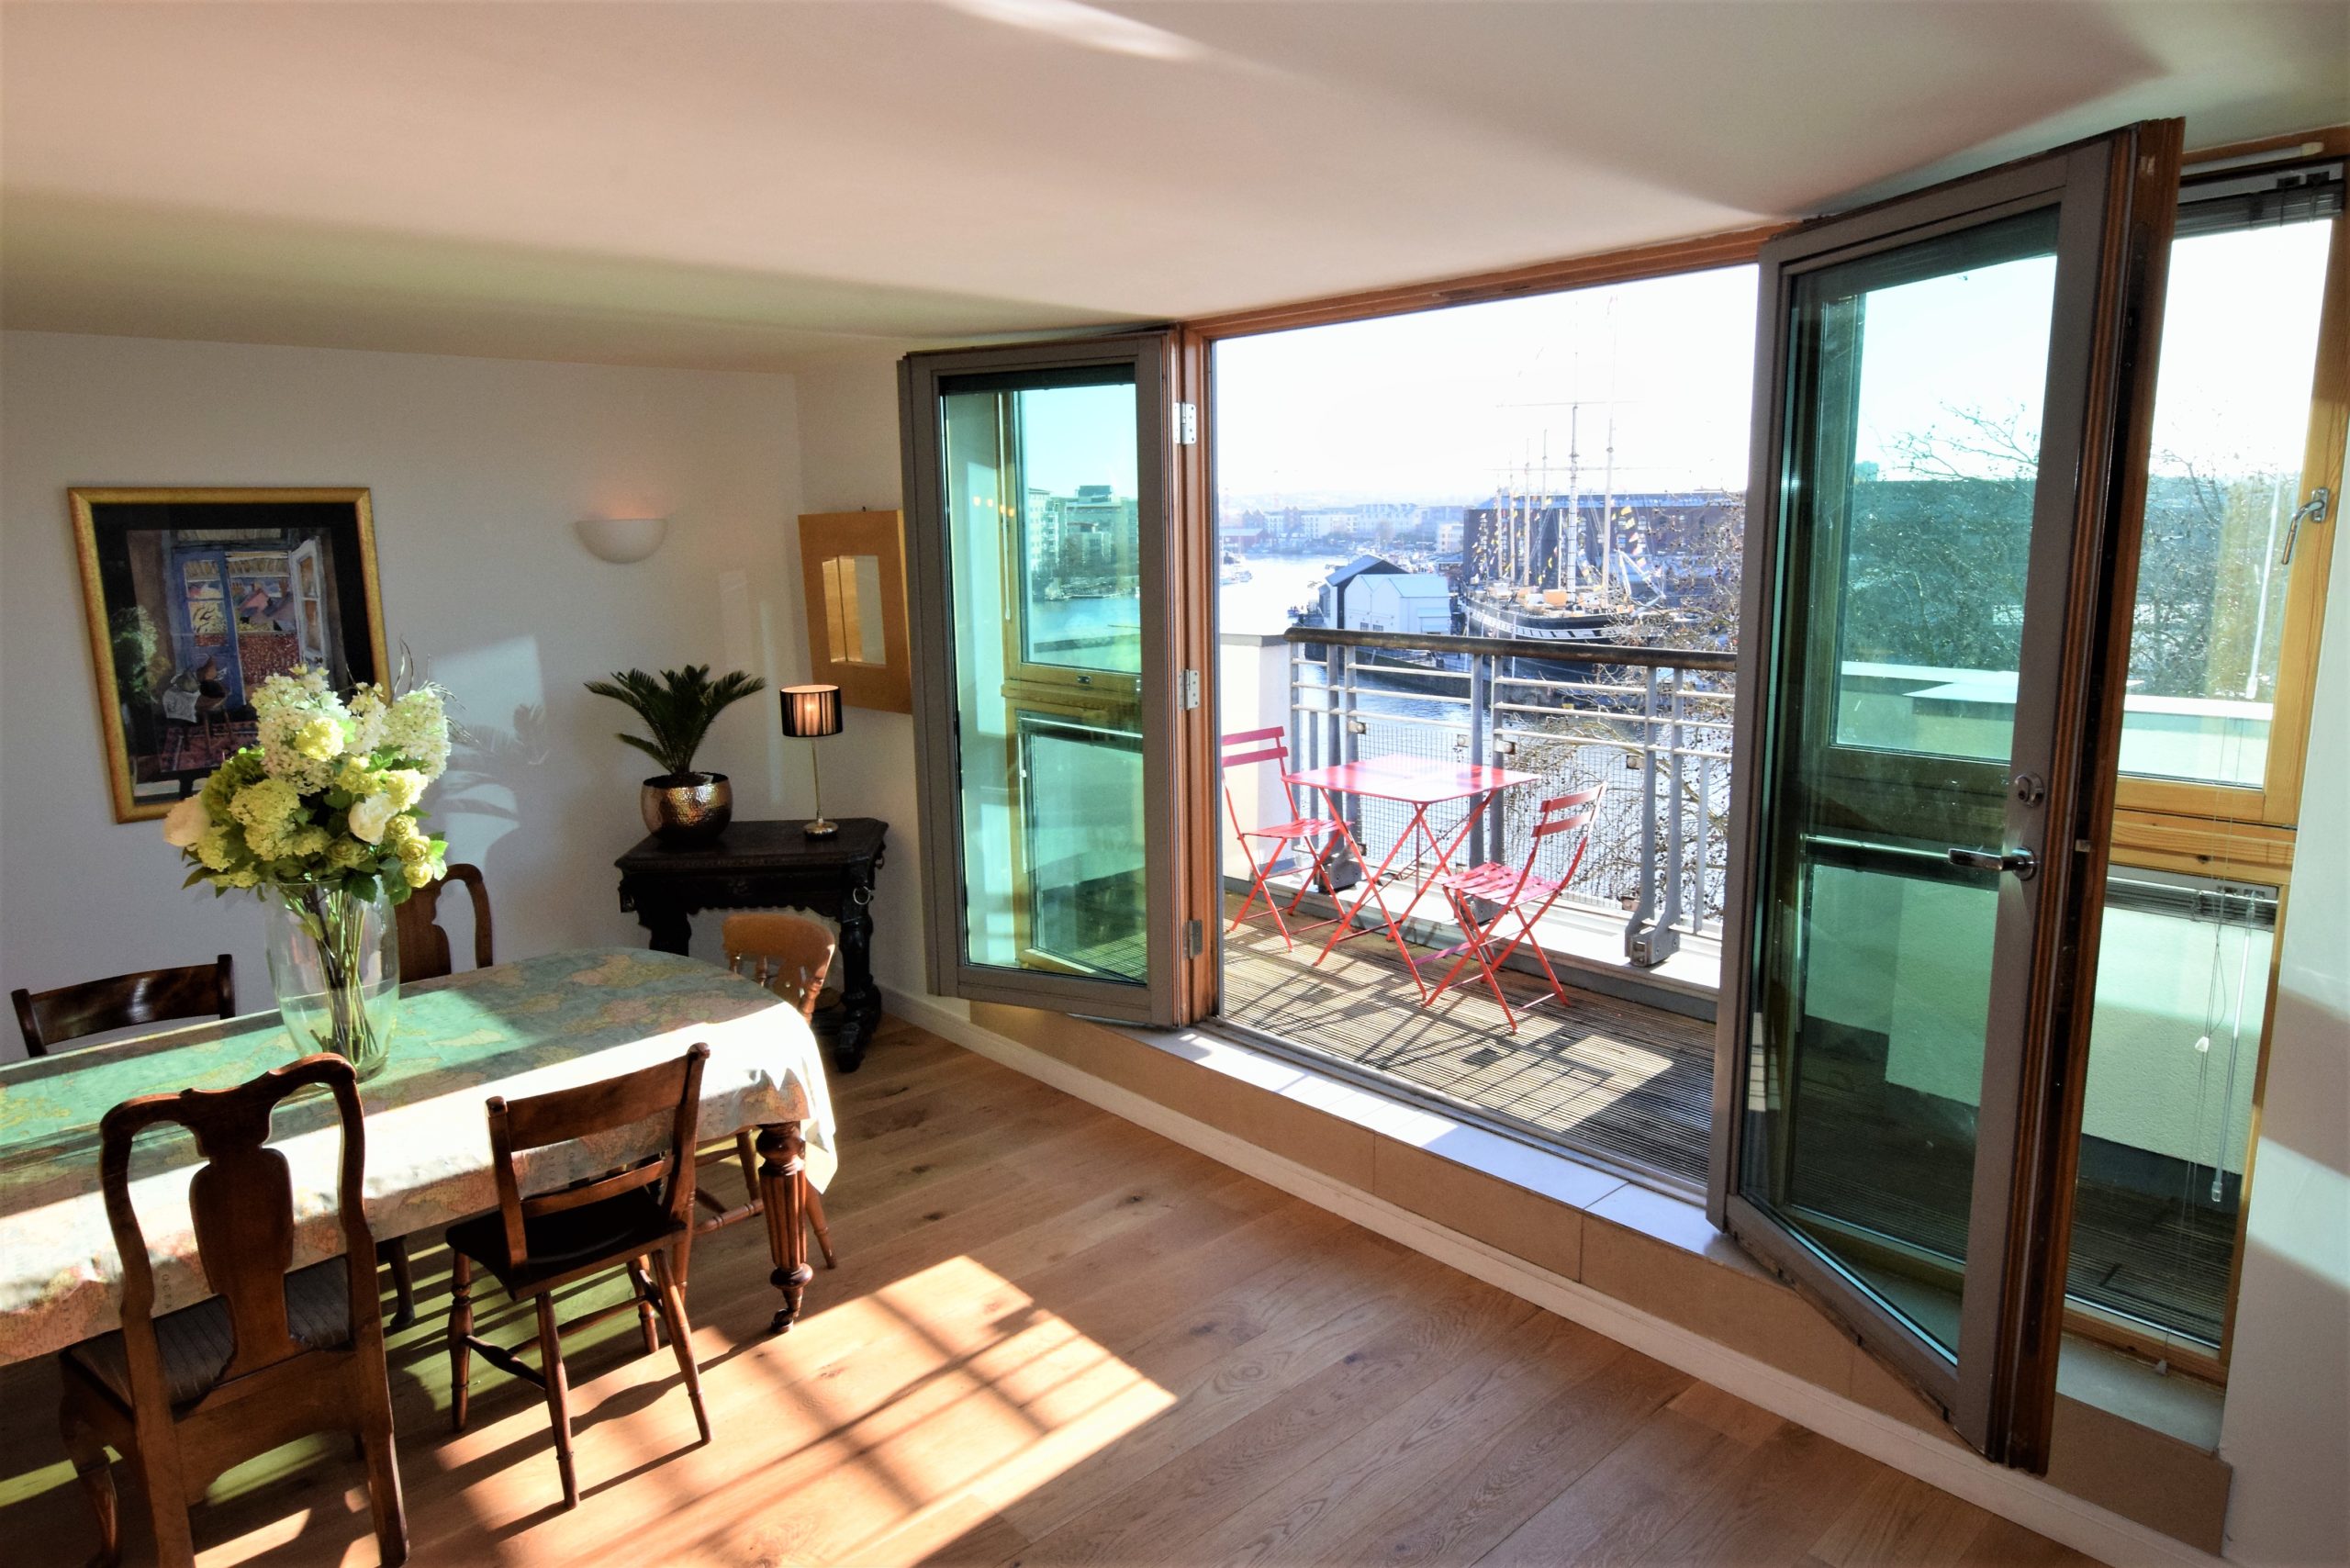 Brunel View - Serviced apartment with a view in Bristol - Your Apartment